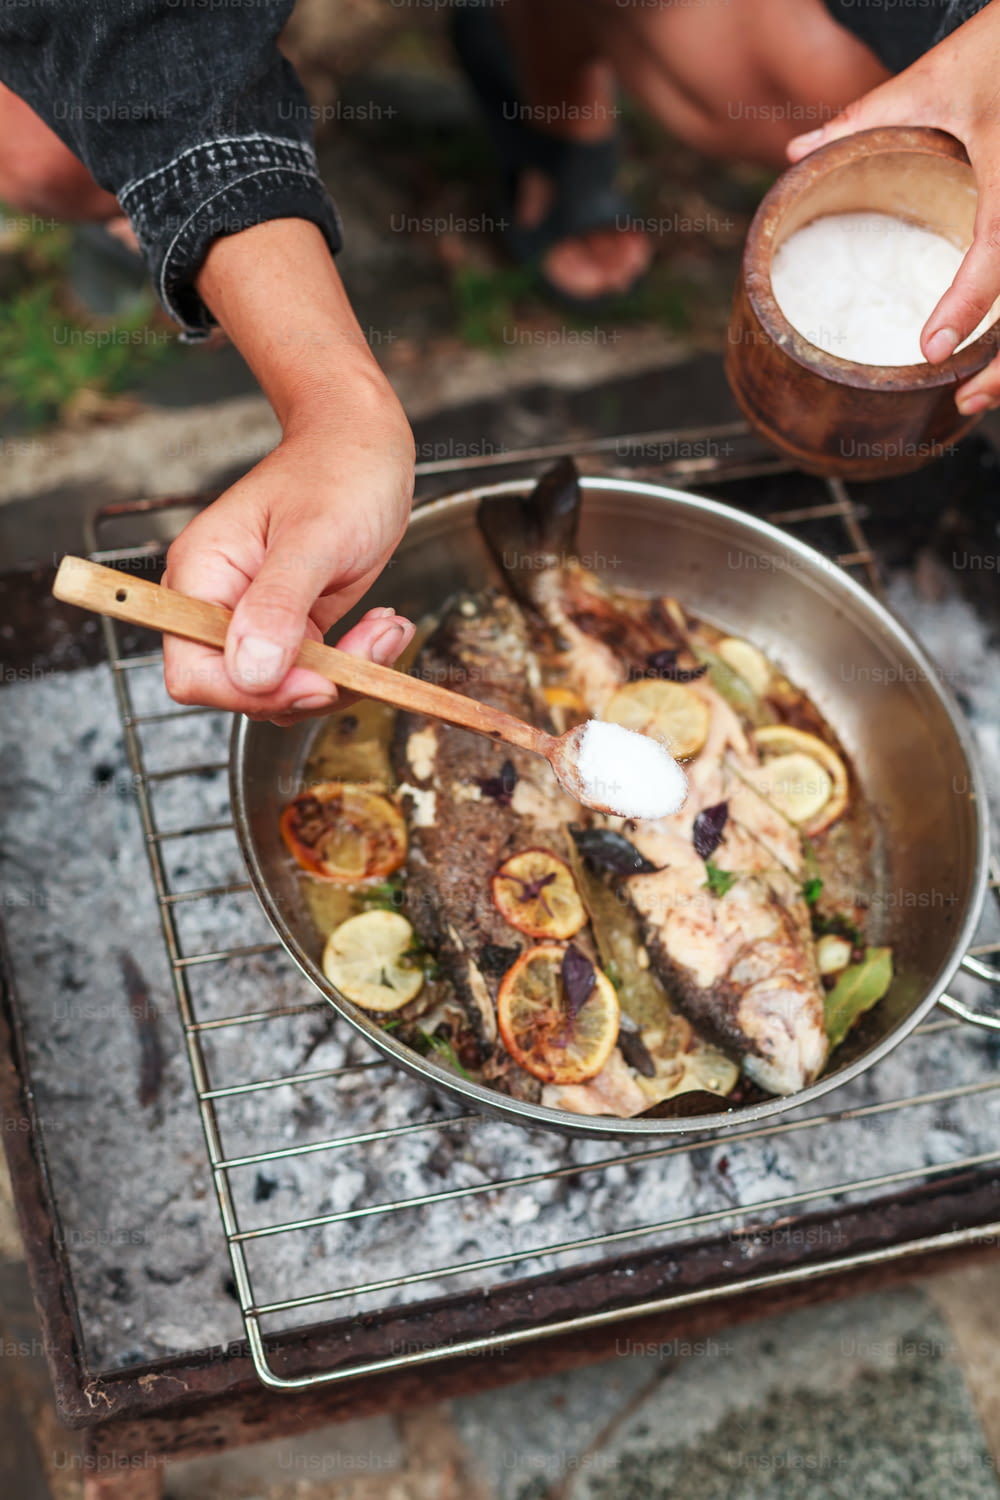 a person is cooking fish on a grill